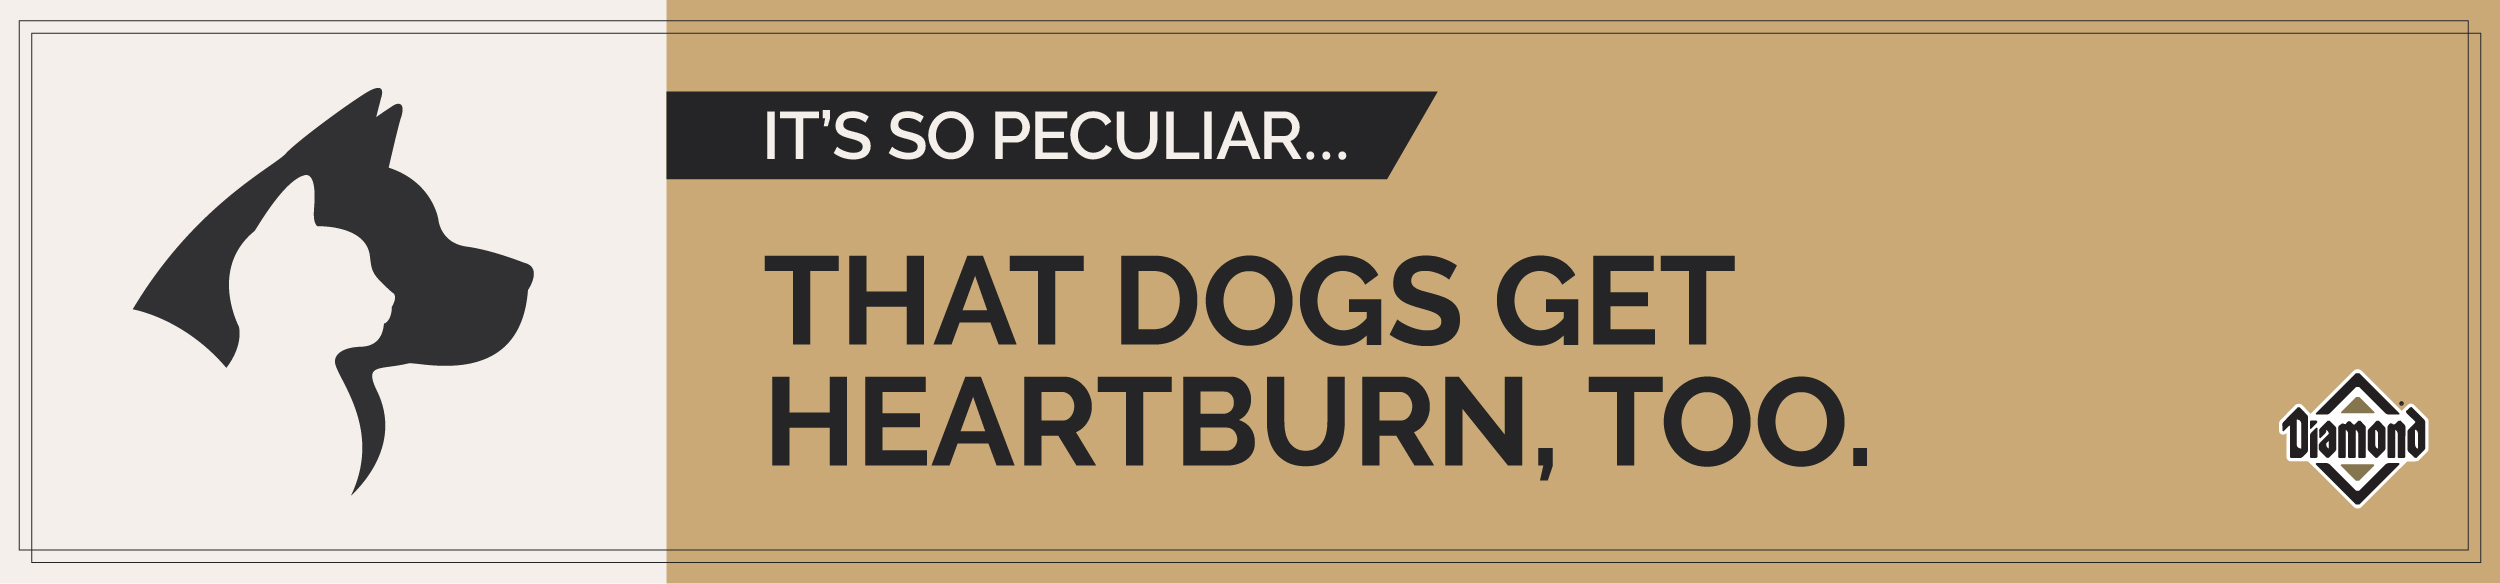 It’s So Peculiar That Dogs Get Heartburn Too Graphic | Diamond Pet Foods